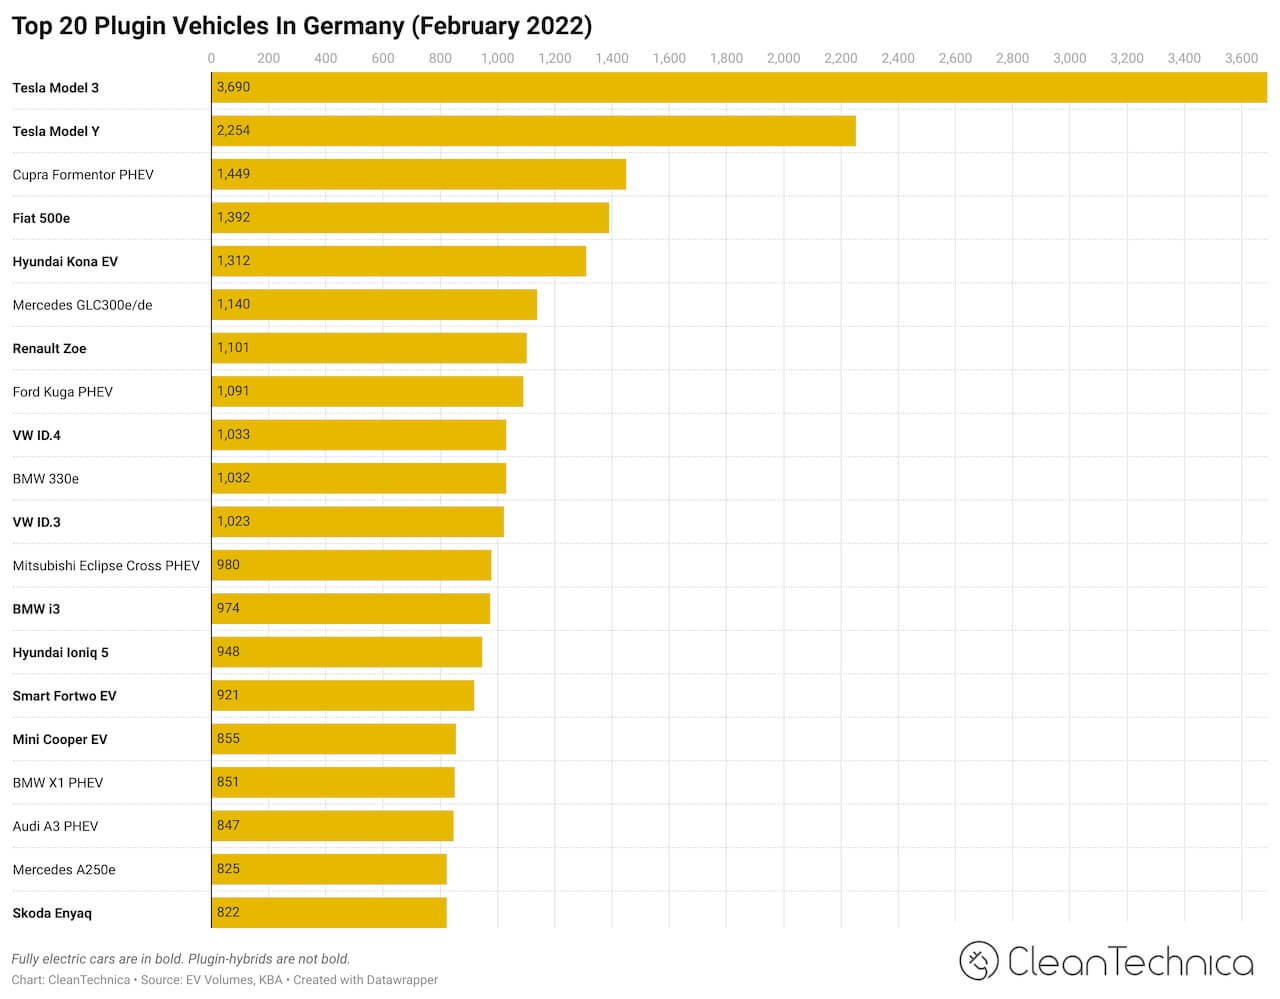 Top-20-Electric-Cars-in-Germany-February-2022-CleanTechnica-logo